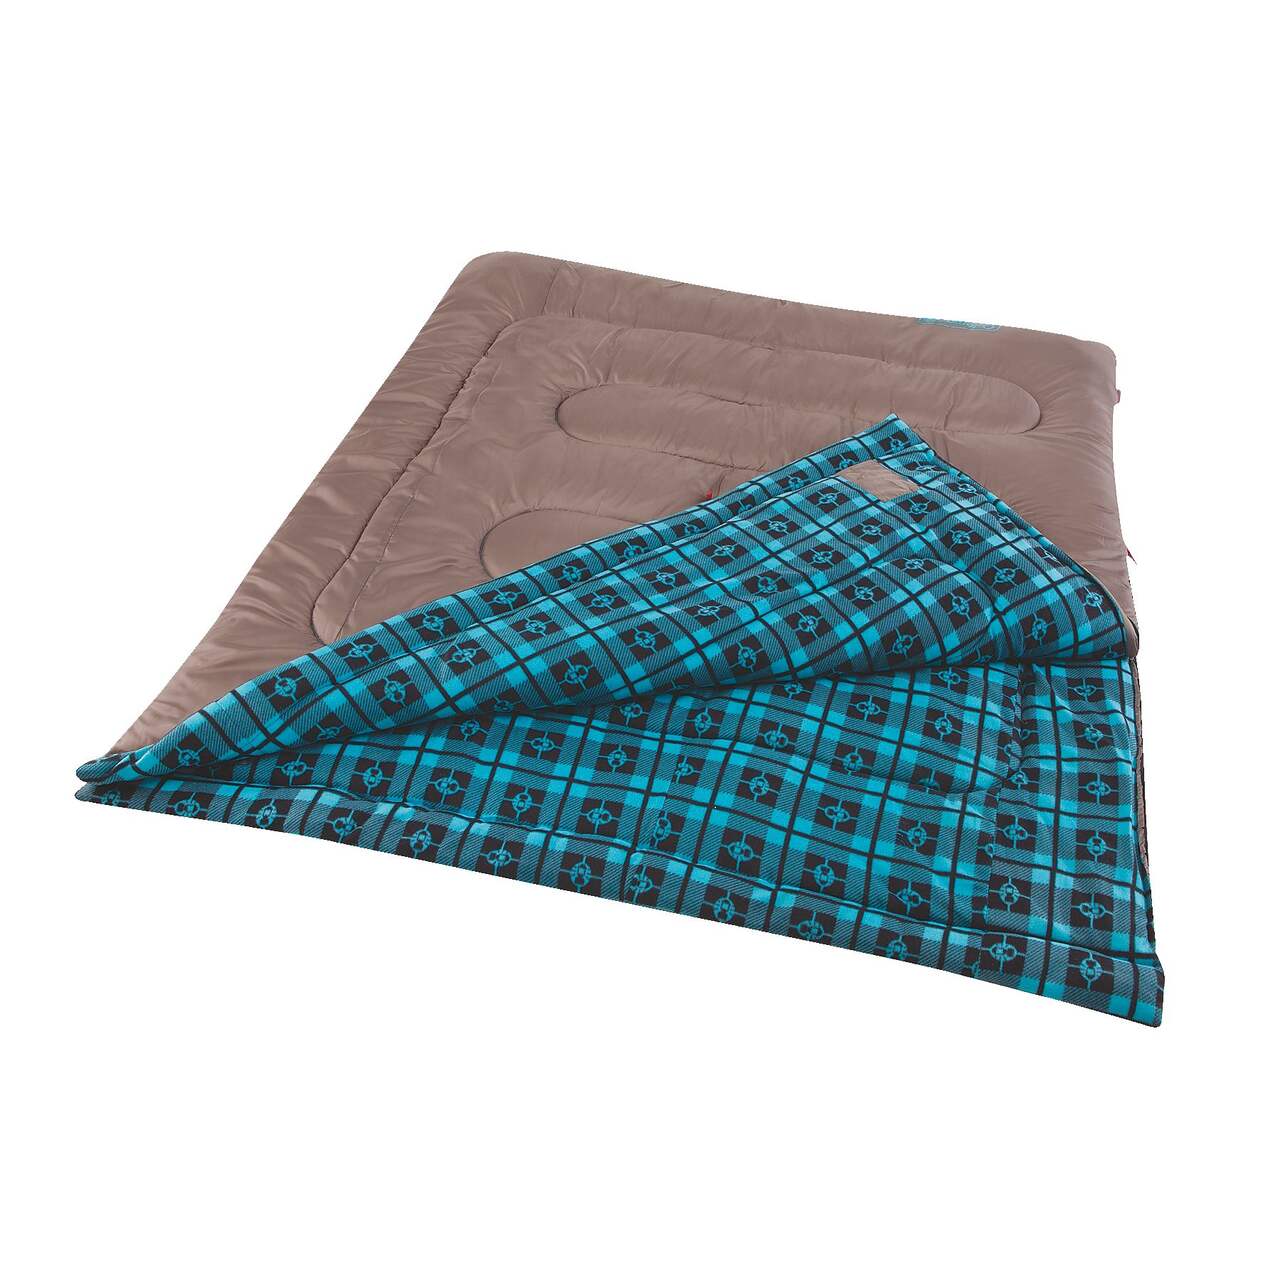 Coleman Granite Peak 4.4 °C Sleeping Bag w/ Compression Sack, Insulated and  Fleece Lined